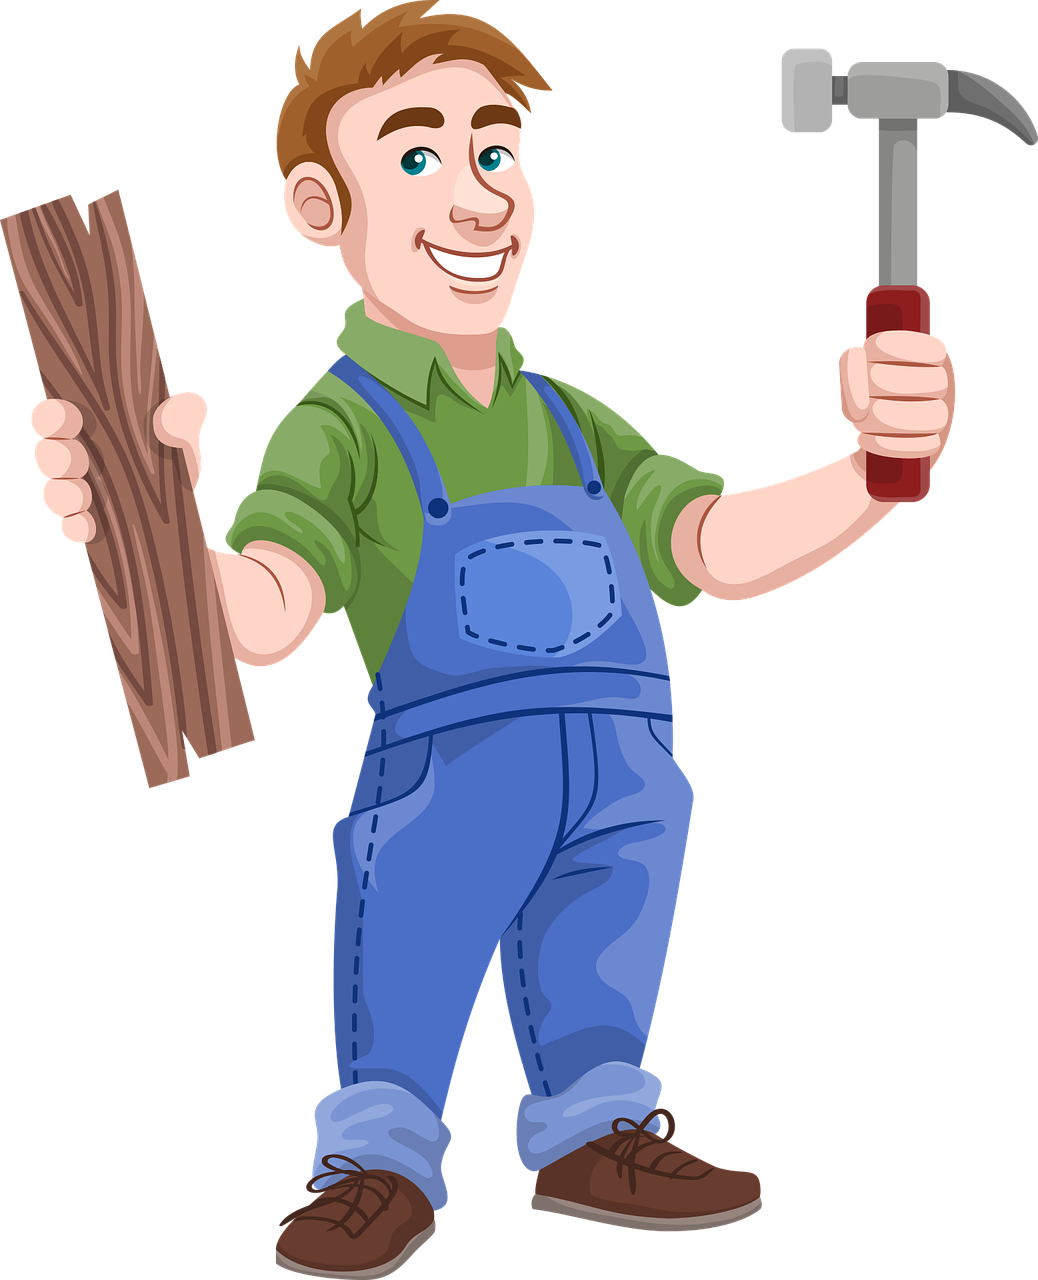 A Cartoon Of A Man Holding A Hammer And Wood